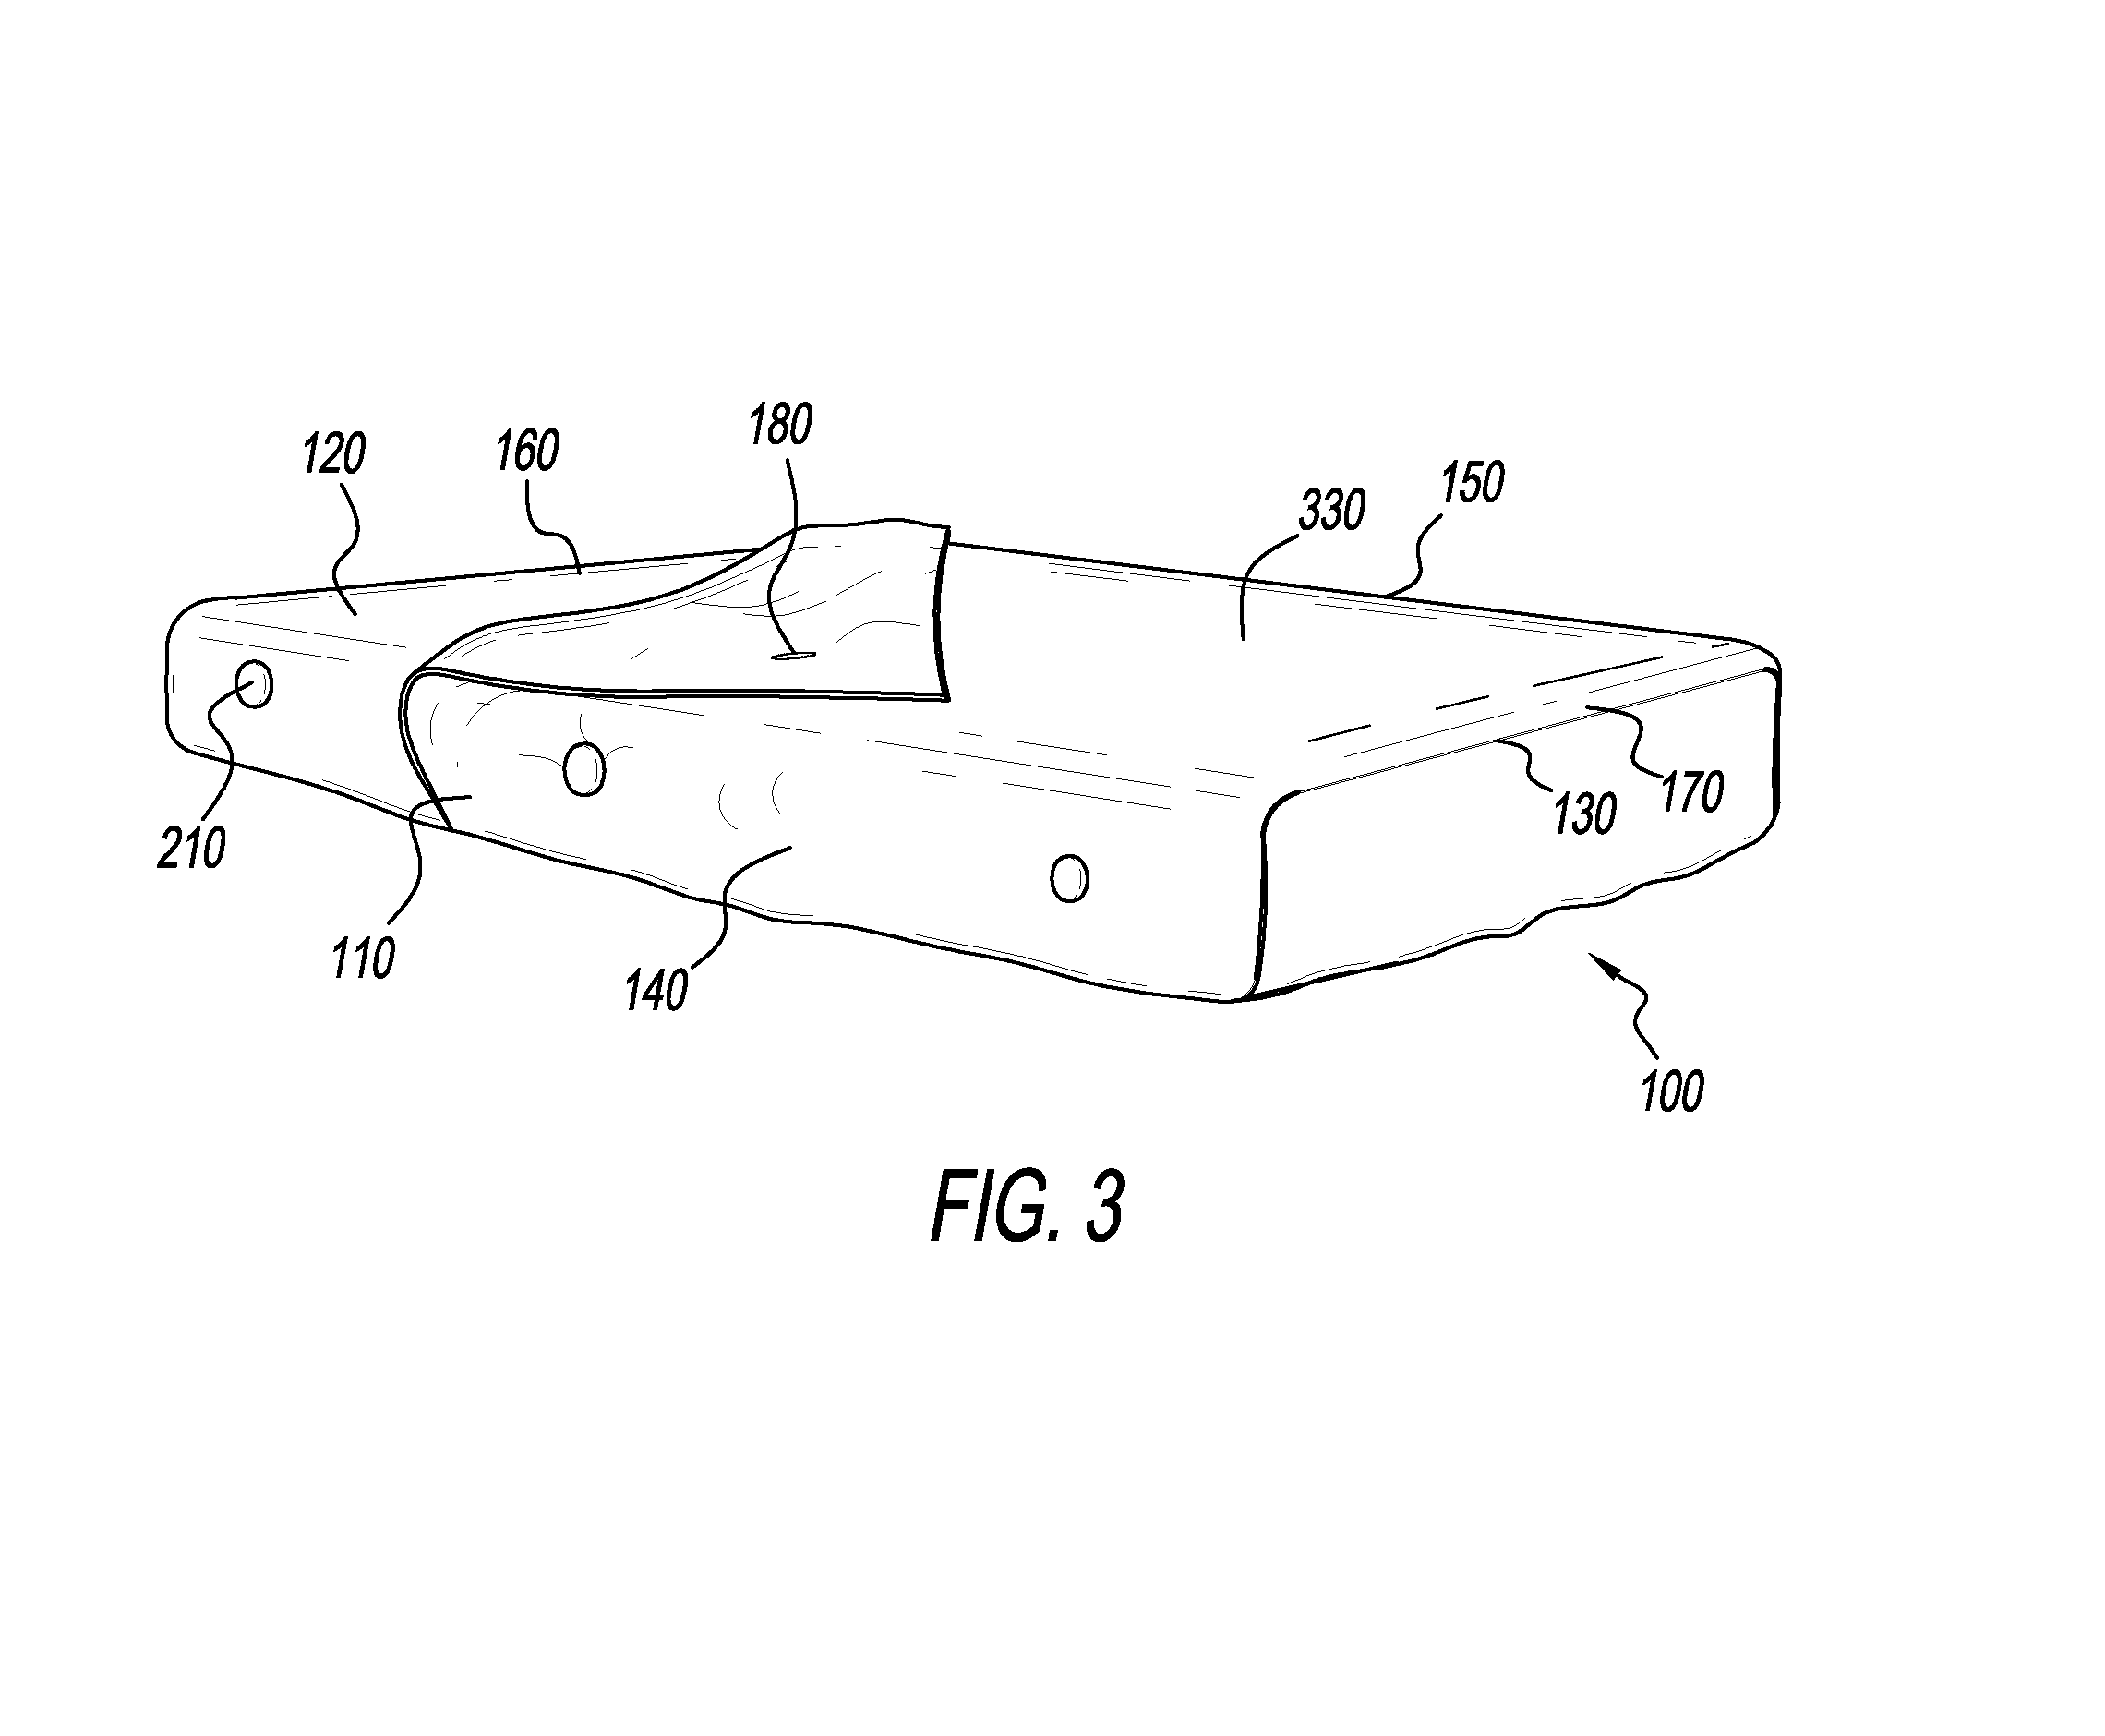 Stabilizing and hybrid bedding sheets for a bed dressing and a set thereof